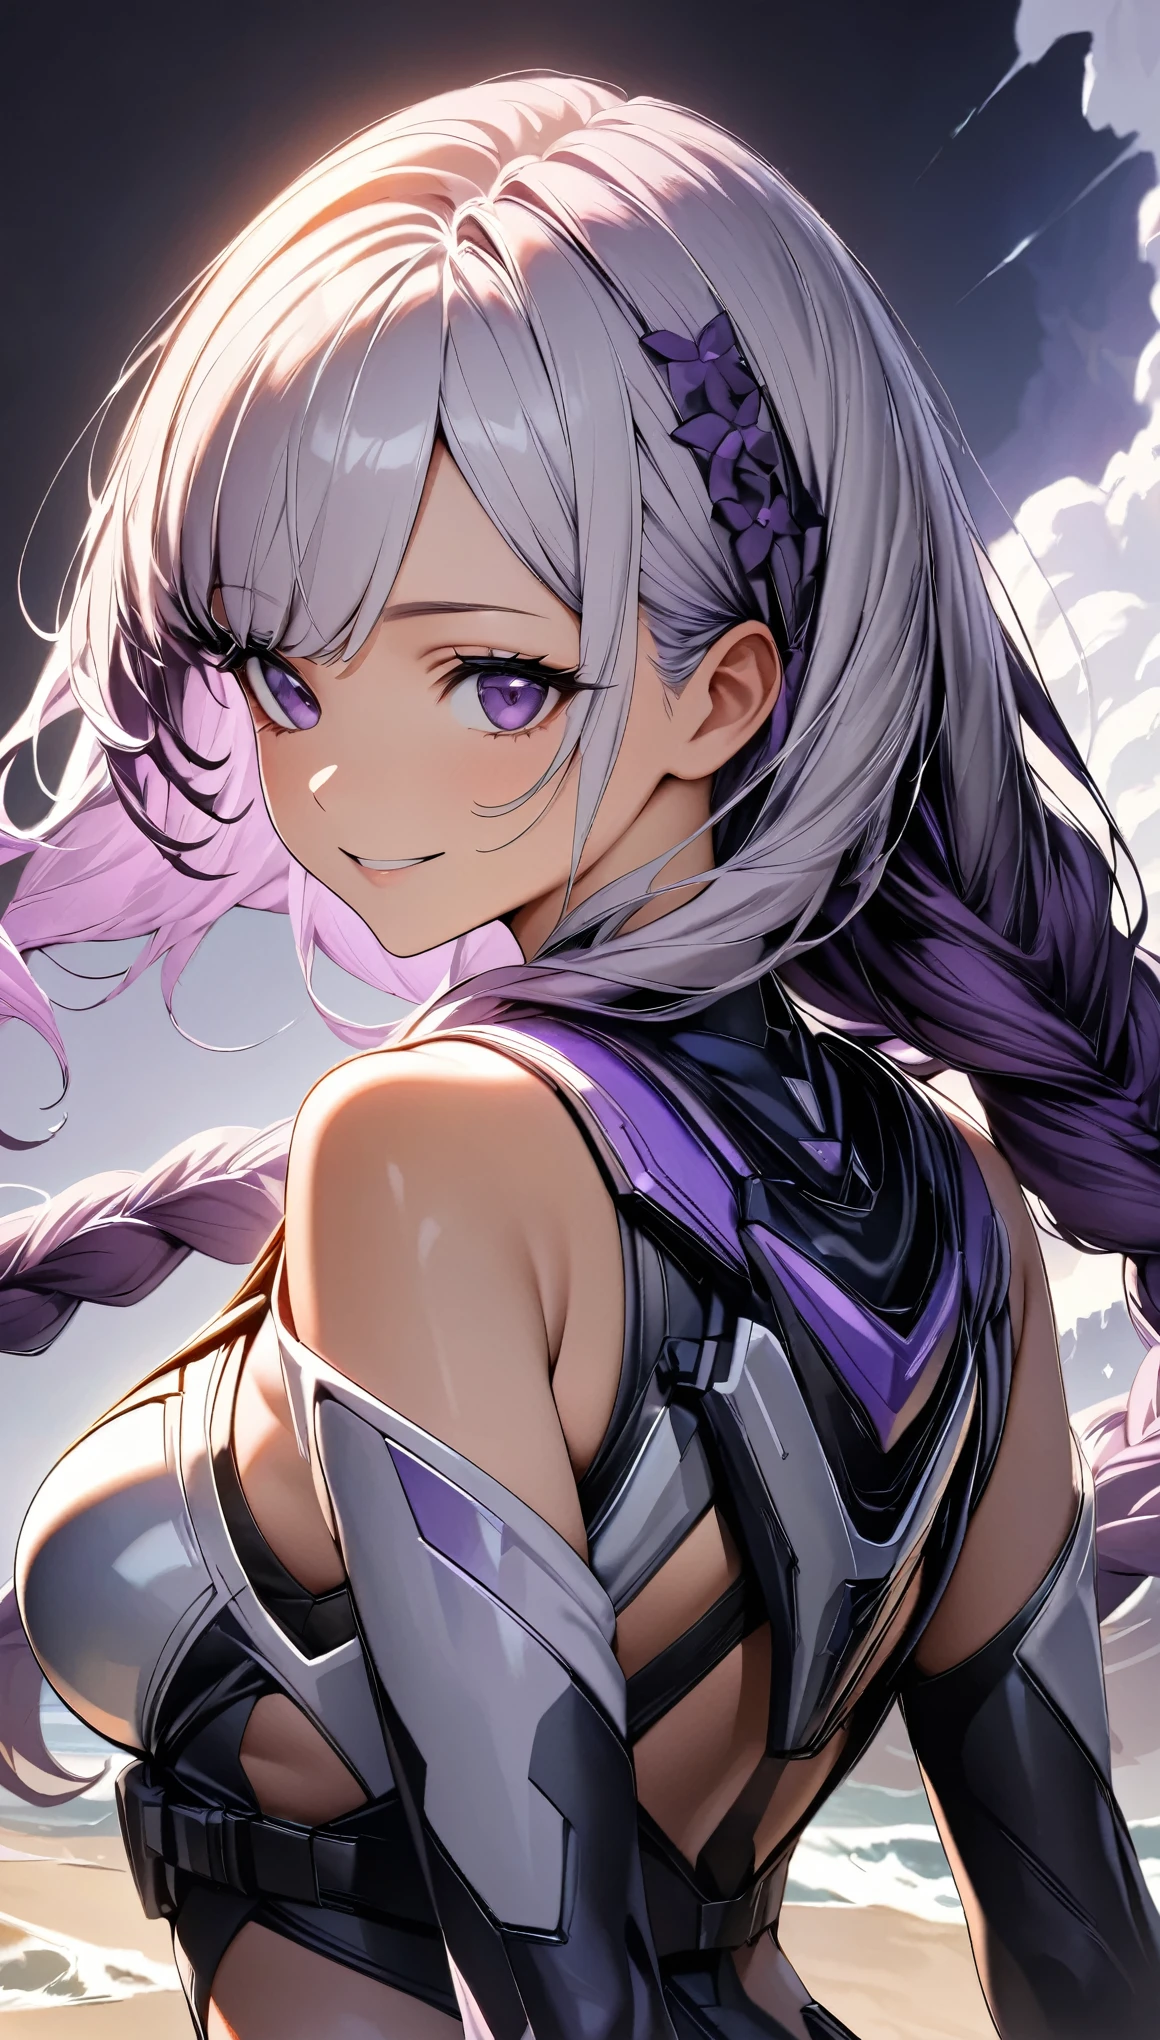 (highest quality:1.2, Very detailed, High Detail, High Contrast, masterpiece:1.2, highest quality, Best aesthetics), 1 Female, Cyber Suit, Separated sleeves, Bare shoulders, ((White Hair:1.4, Purple bicolor hair, Braided long hair, White and purple hair accessories:1.2, Dark purple bangs:1.1, Asymmetrical bangs)), Purple Eyes, Double eyelids, Detailed face, Loose braid, smile:1.2, Indifference, kind, Rear view, turn around, 肩ごしのsmile, (((Backwards, wave hands:1.2))), A park filled with greenery, squirt:1.2, White cloud, Wide-angle lens.